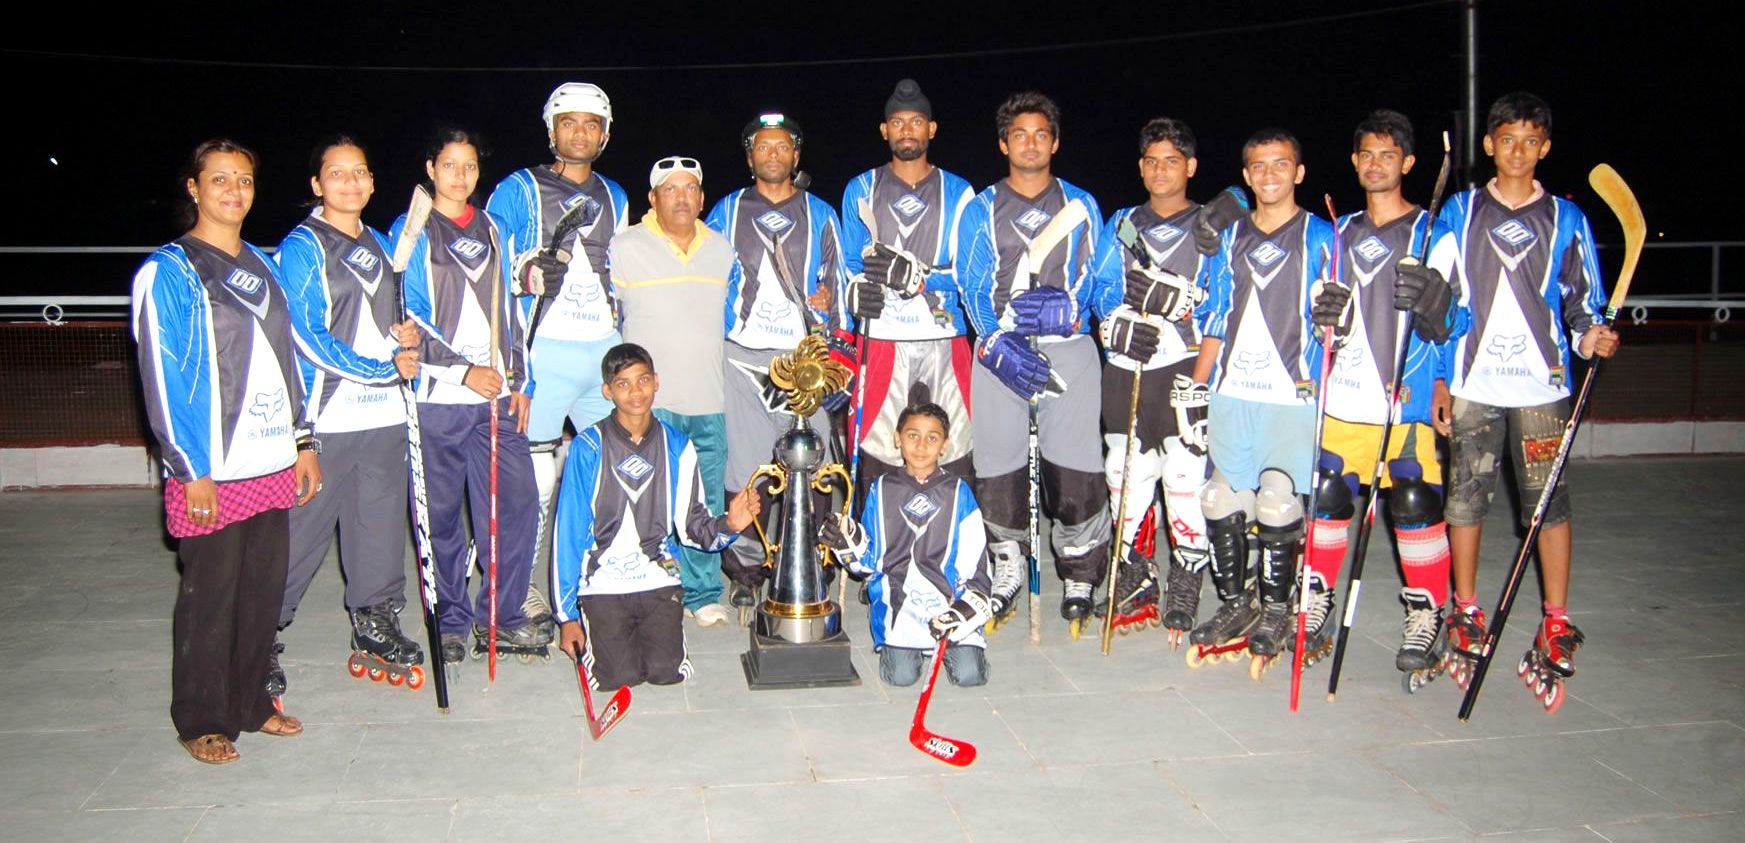 Longest outdoor inline hockey game - Indian players sets world record